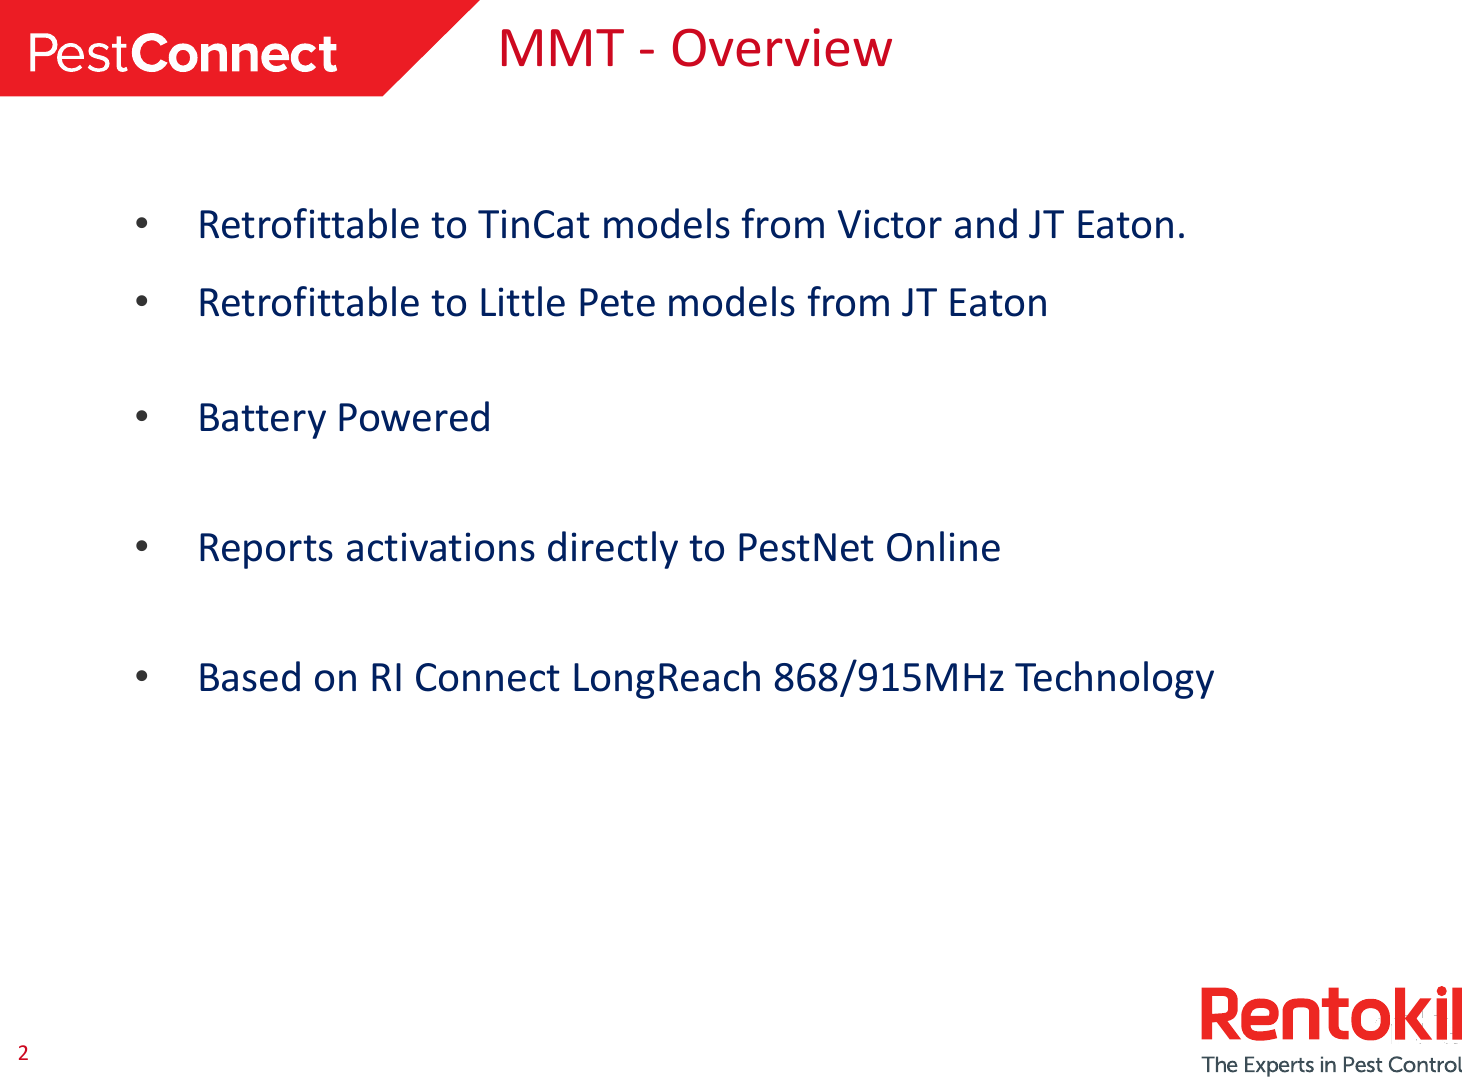 2 MMT - Overview •Retrofittable to TinCat models from Victor and JT Eaton.  •Retrofittable to Little Pete models from JT Eaton •Battery Powered •Reports activations directly to PestNet Online •Based on RI Connect LongReach 868/915MHz Technology 